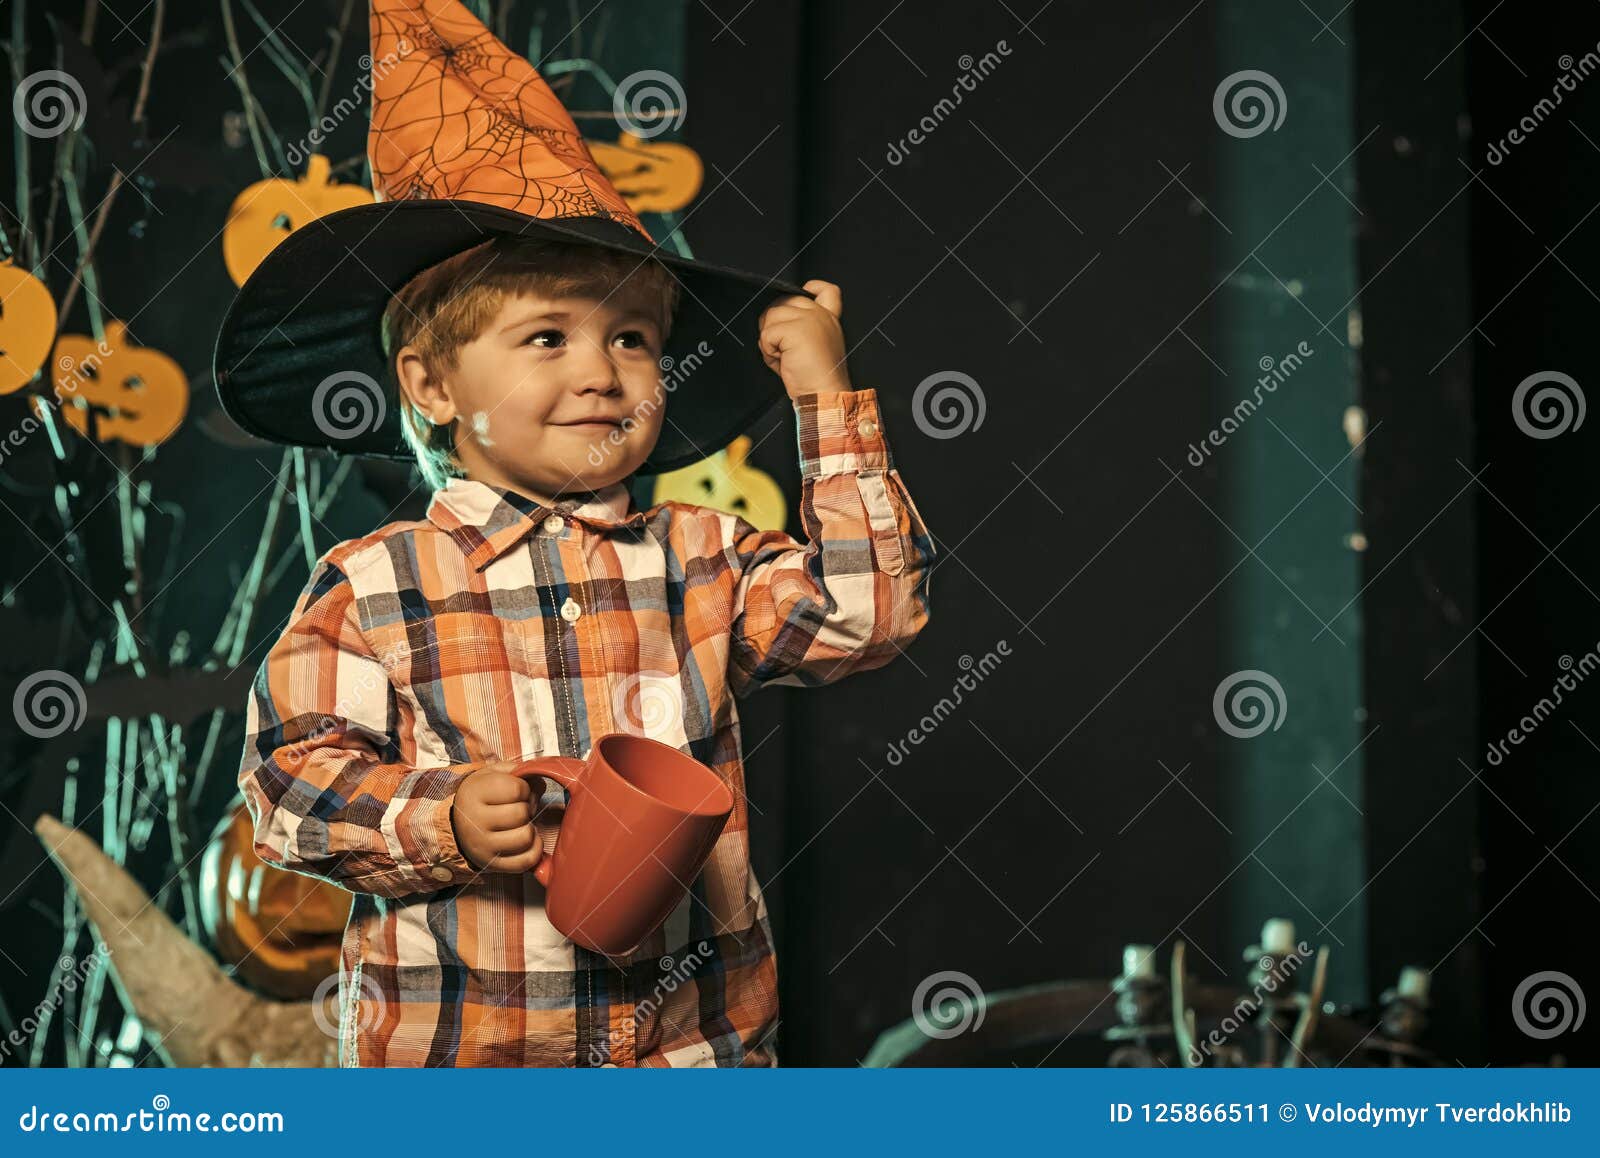 Halloween Boy Kid with Happy Face at Pumpkin. Stock Image - Image of ...